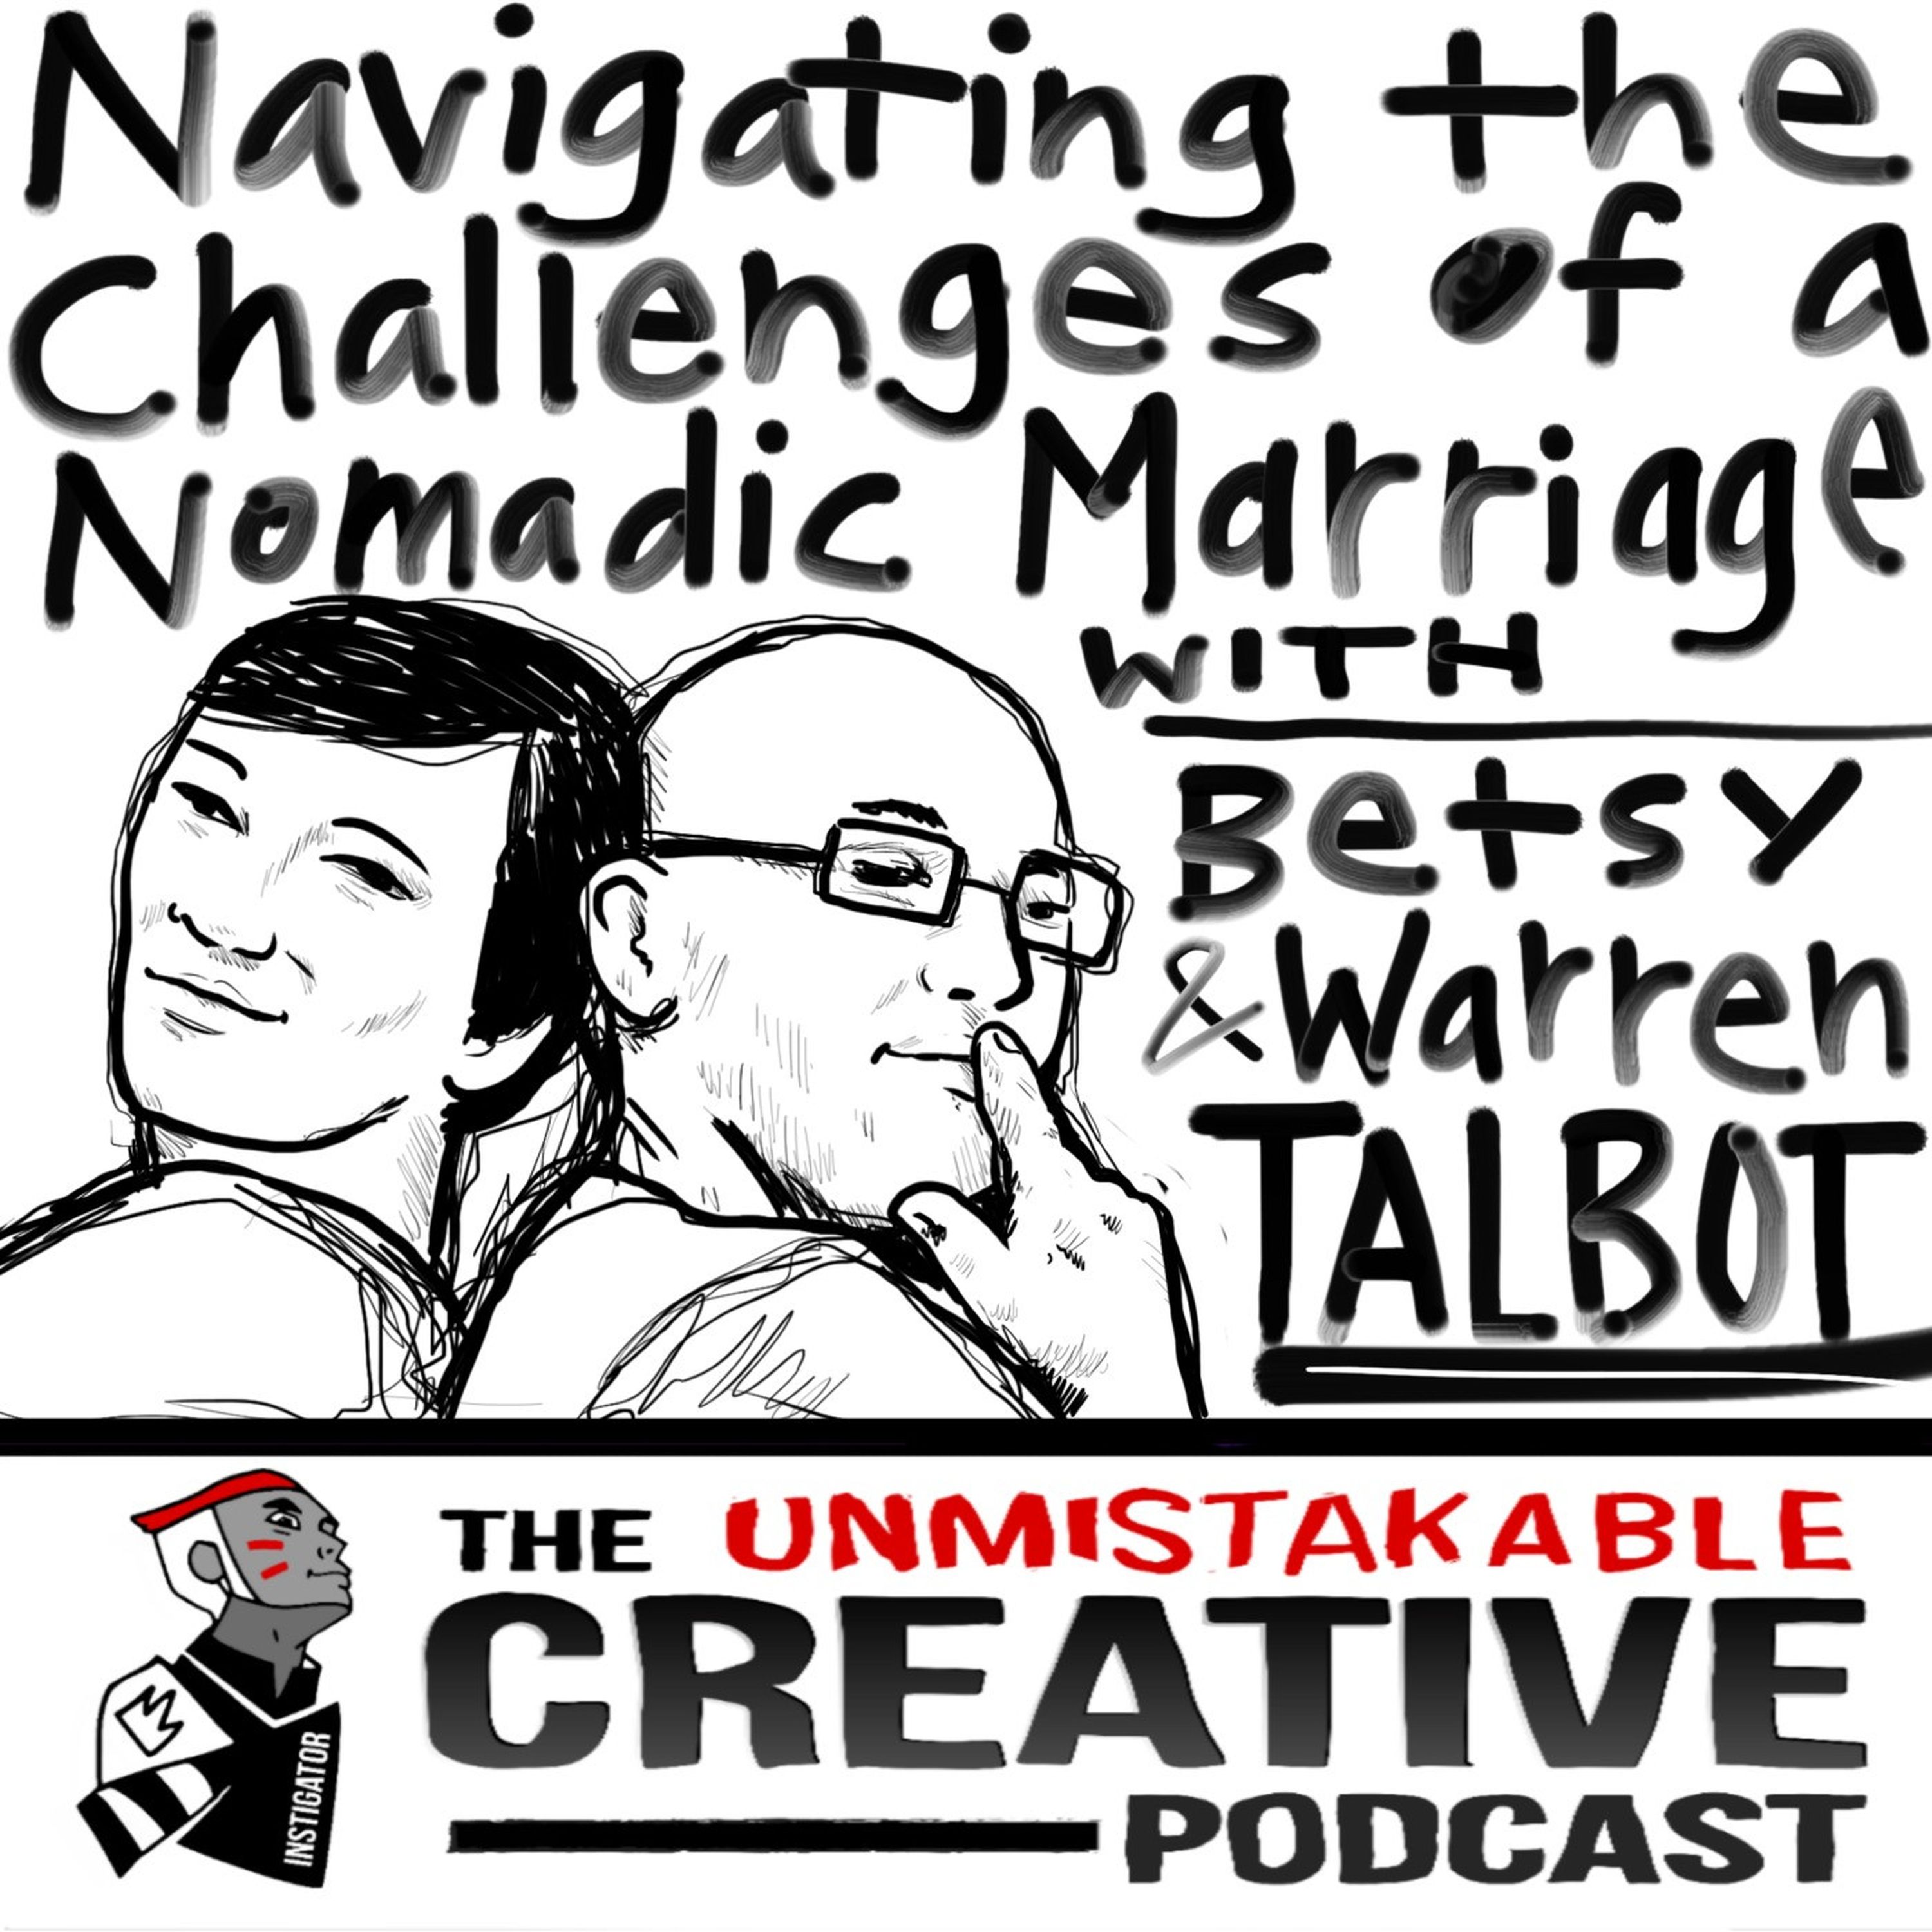 Navigating the Challenges of a Nomadic Marriage with Betsy and Warren Talbot